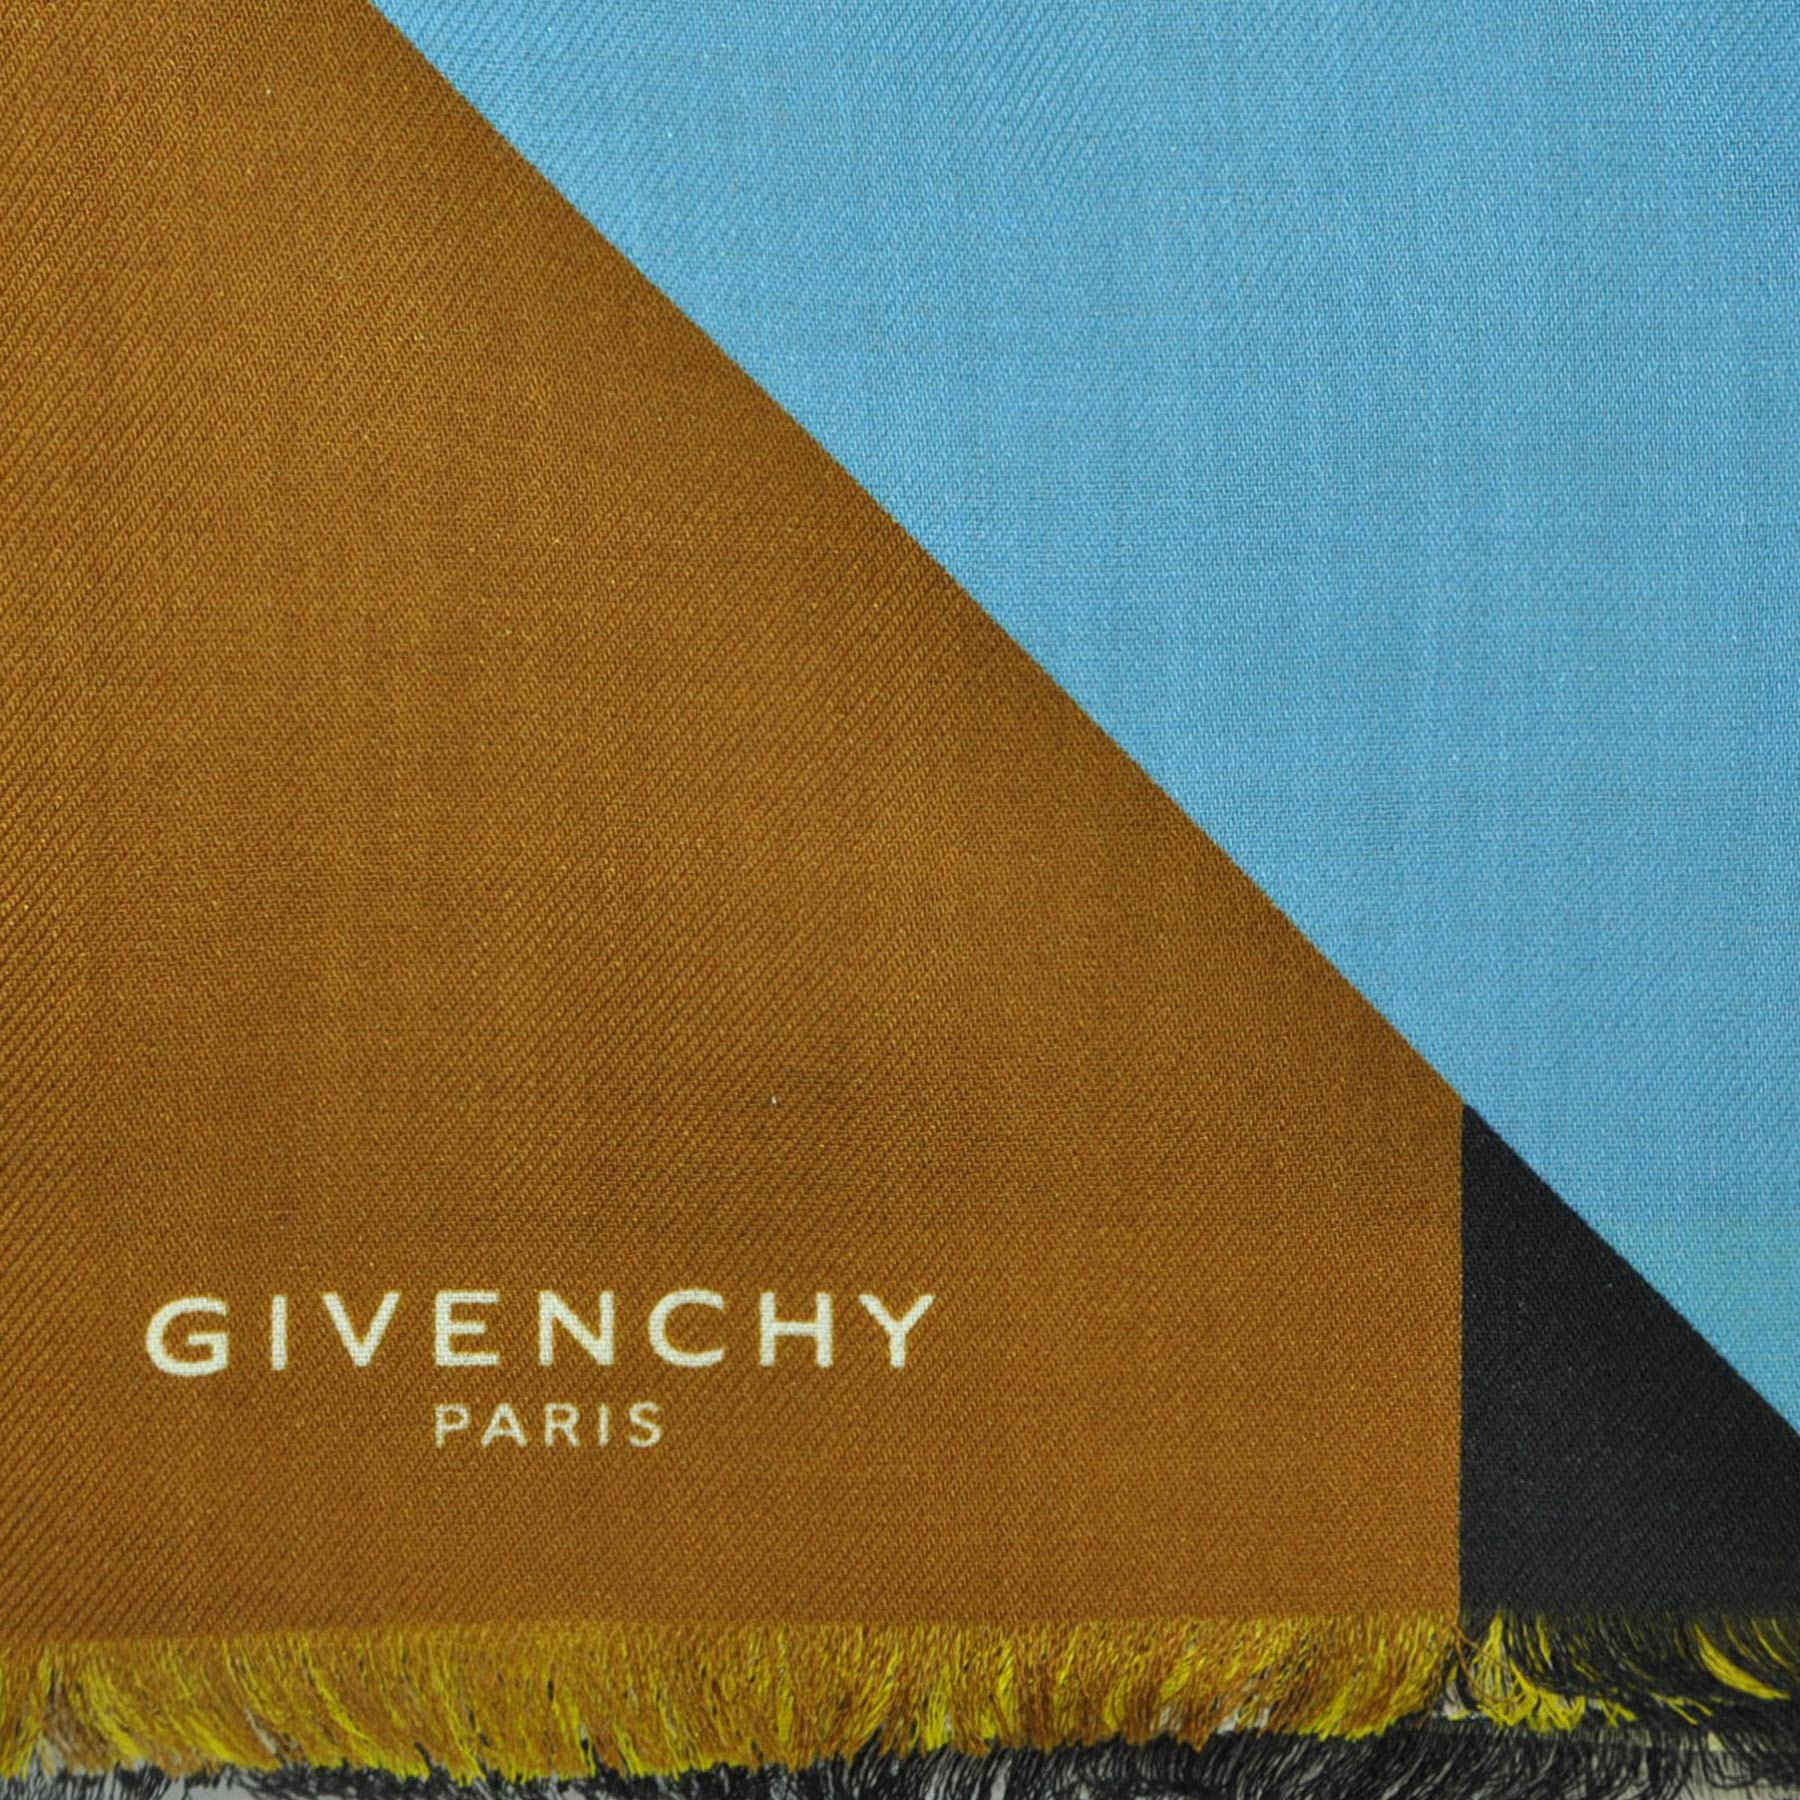 Givenchy Scarf Geometric Flag Design - Extra Large Square Wool Silk Scarf SALE